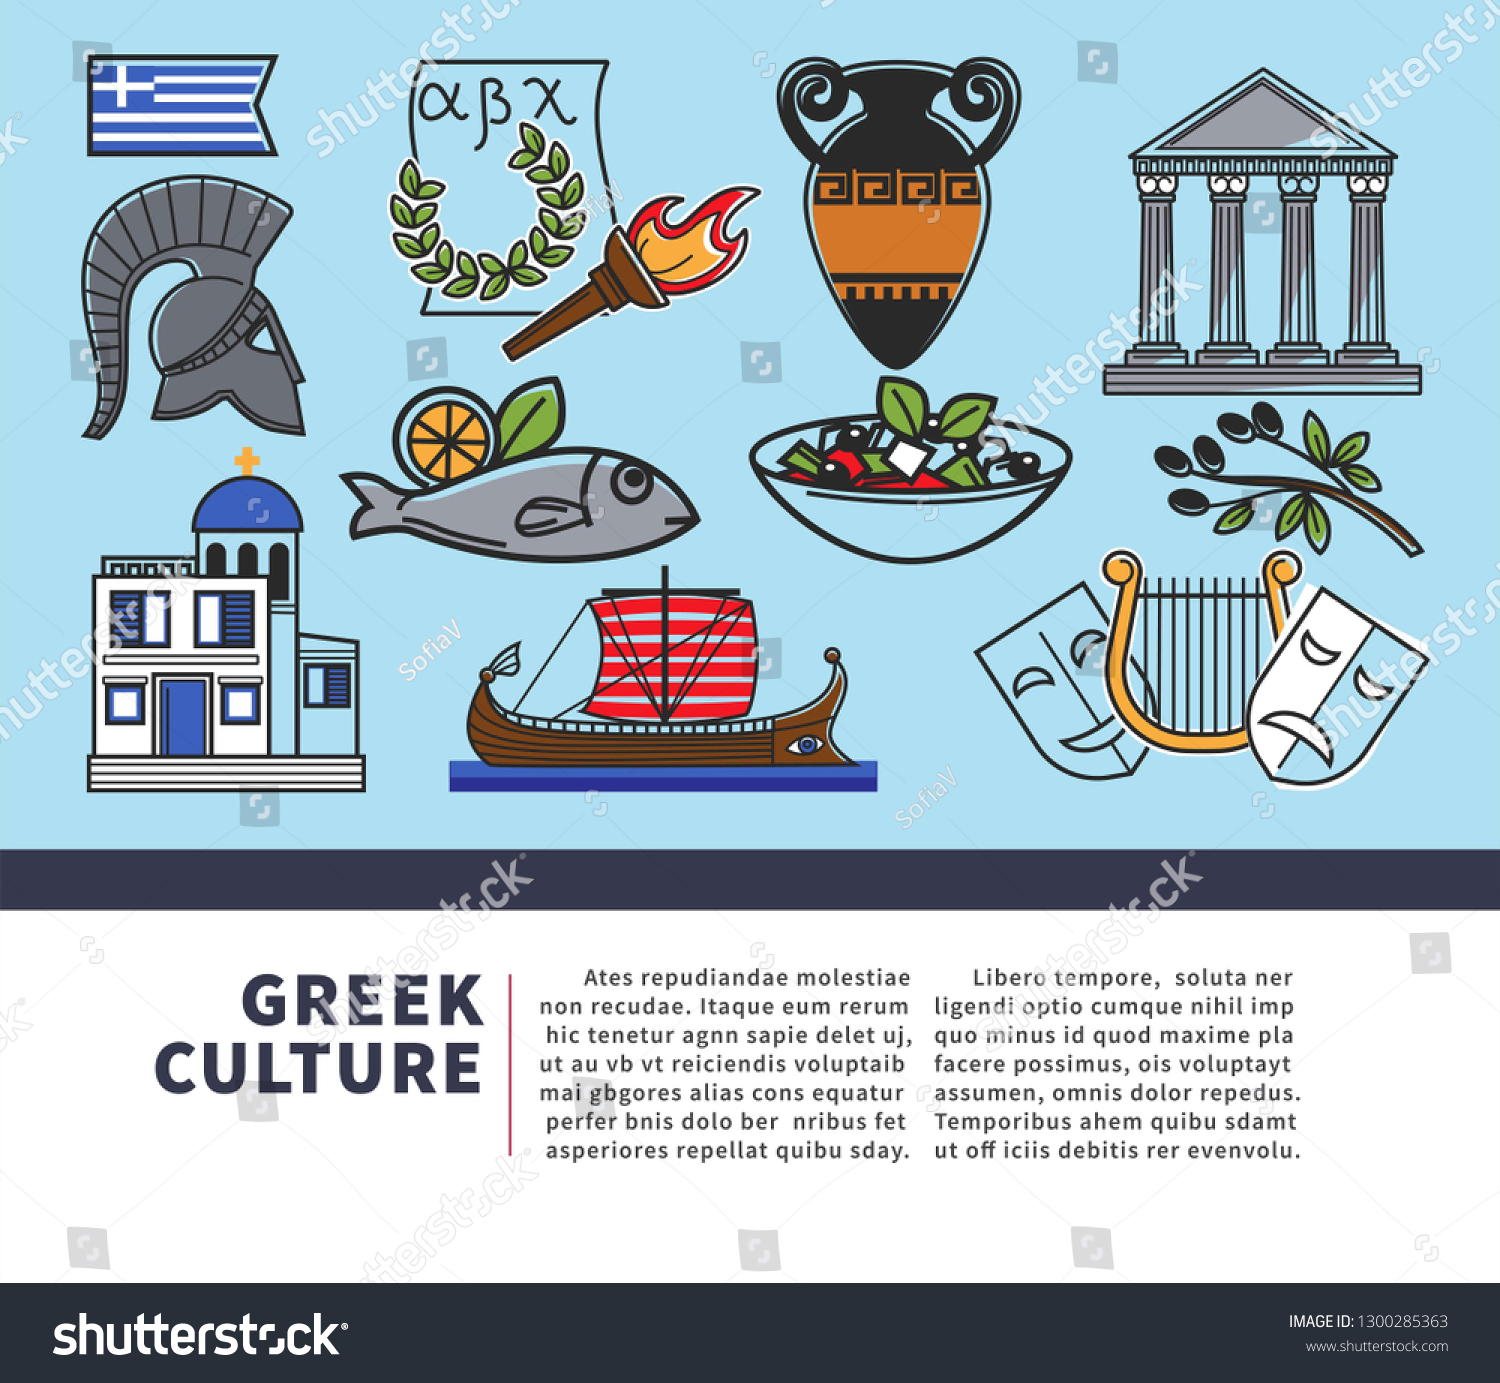 SVG of Architecture and food Greek culture symbols vector historic relics national flag and alphabet torch and laurel wreath amphora and pillars olives and salad fish and boat theatrical masks and church. svg